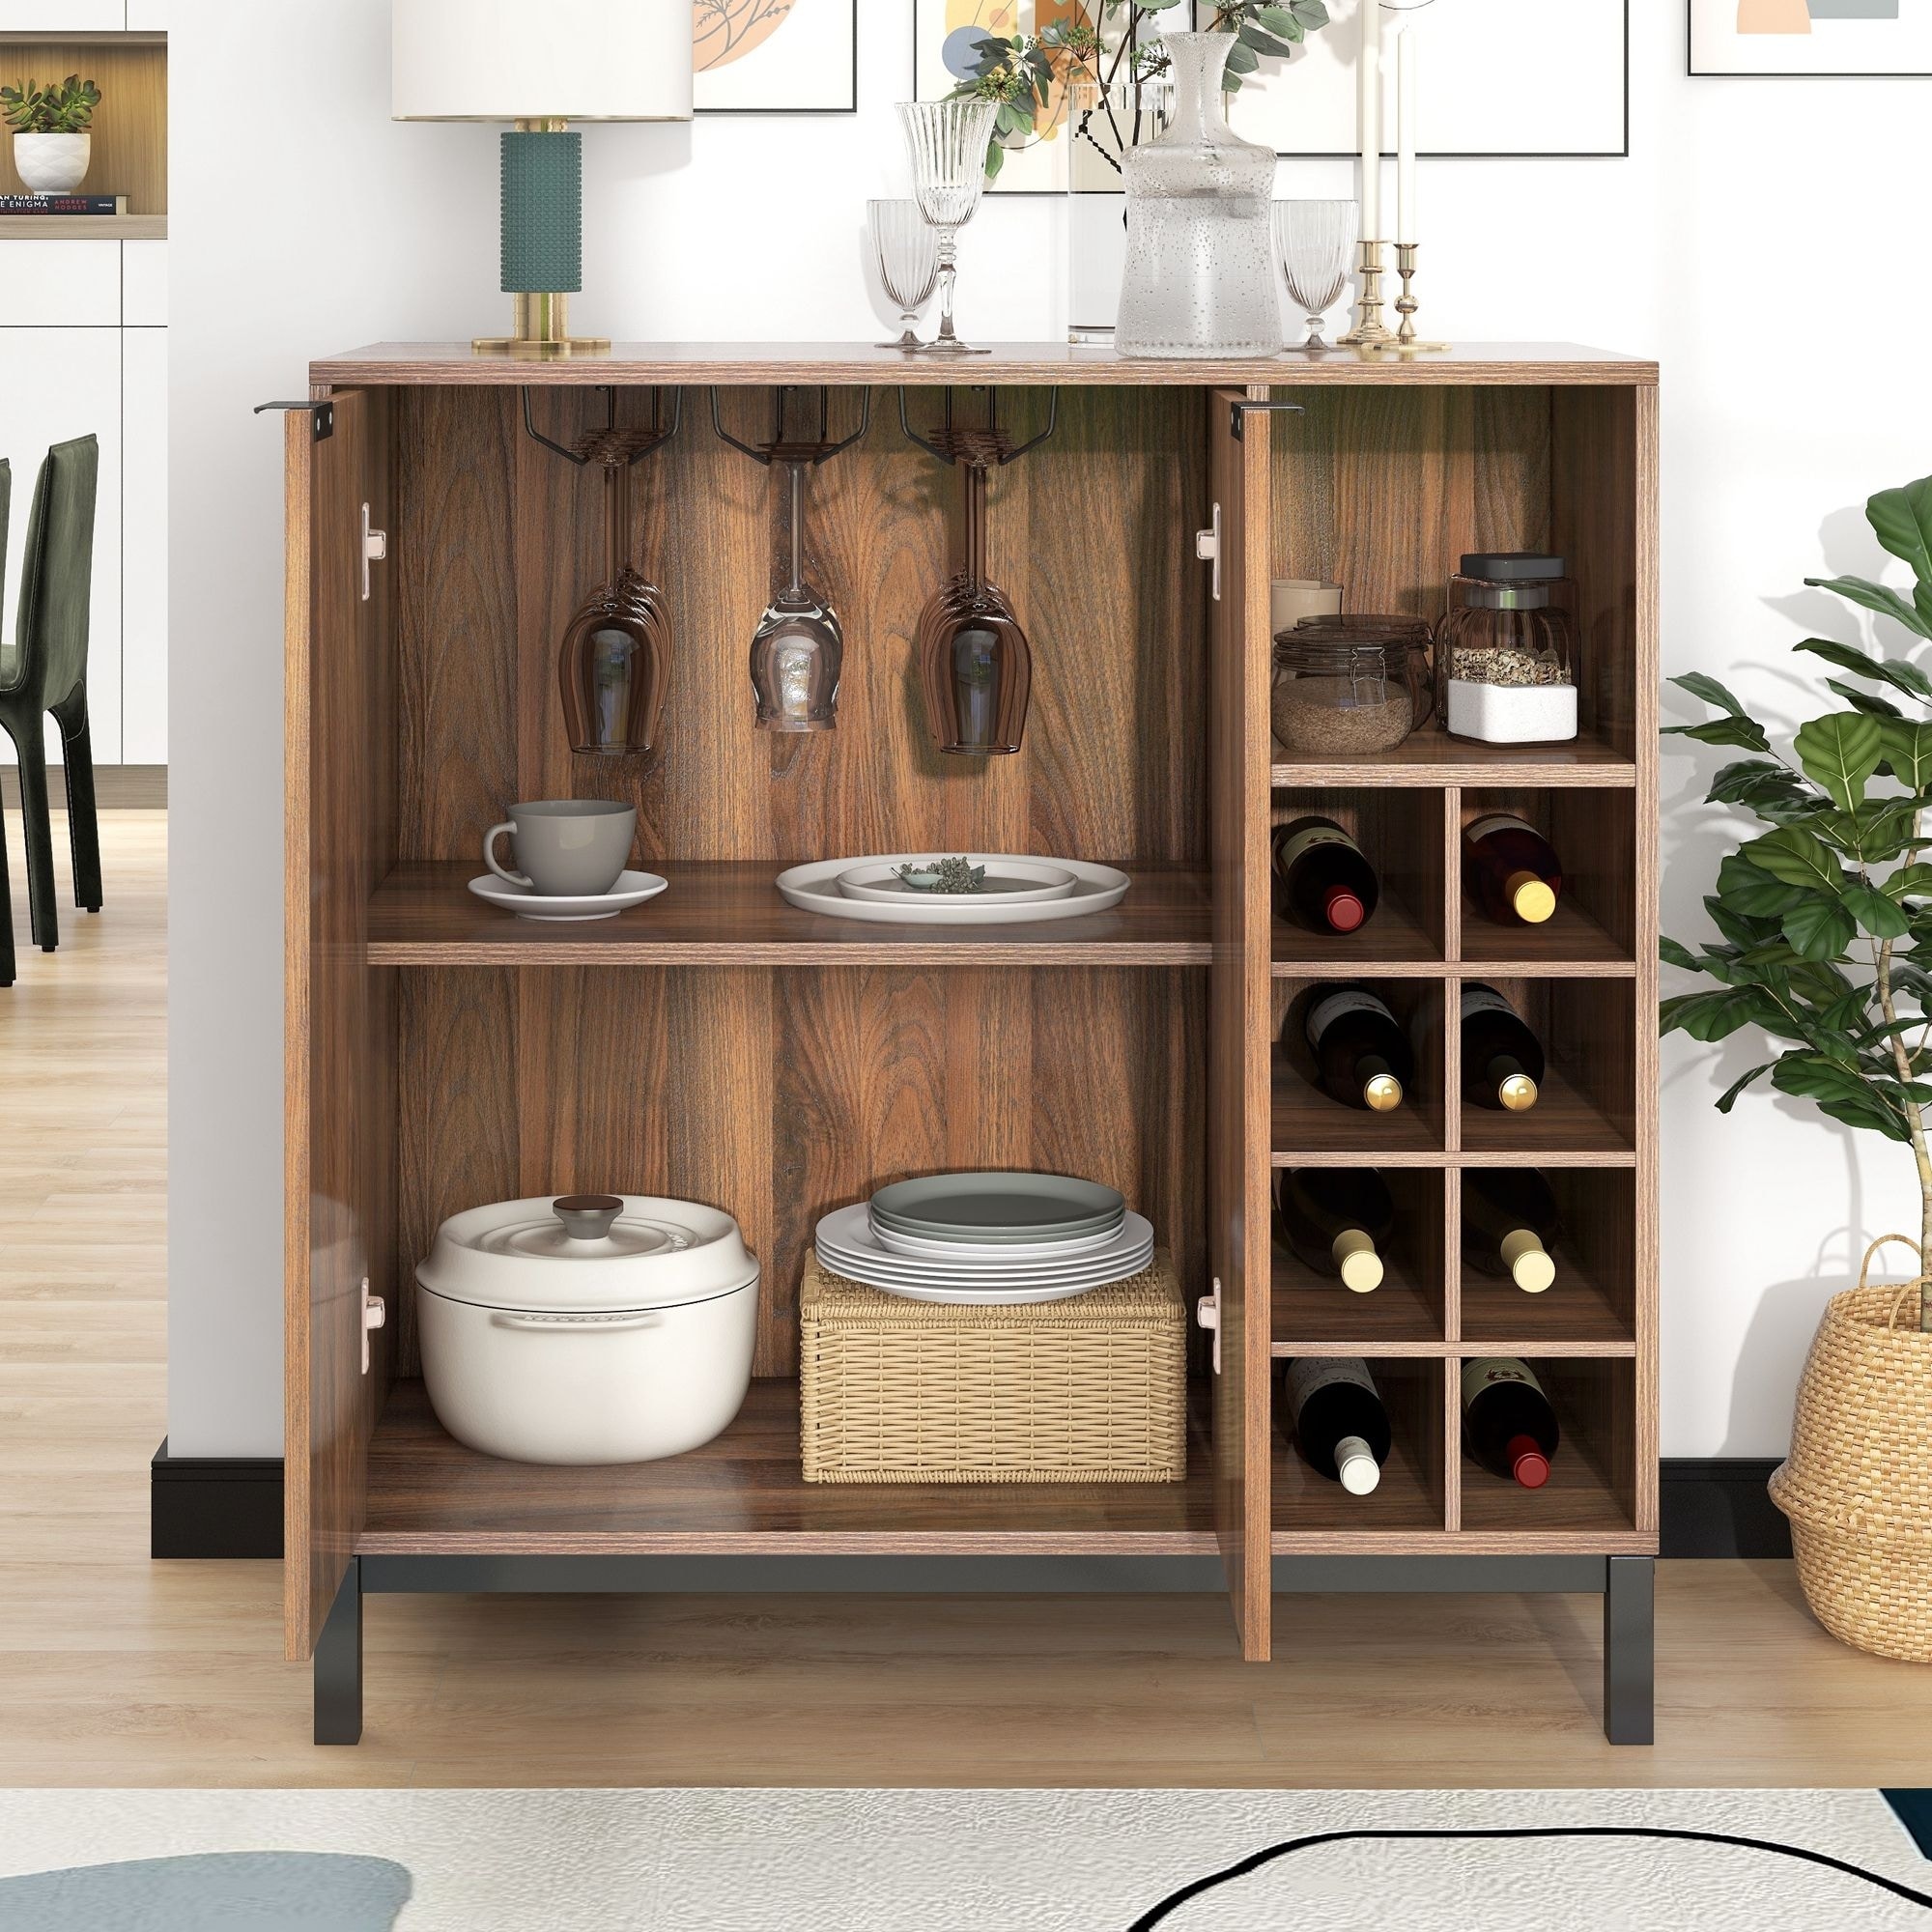 https://ak1.ostkcdn.com/images/products/is/images/direct/3f94989f45bcdd2386fa1228b8a42c4d86ae59e3/Sideboards-and-Buffets-With-Storage-Coffee-Bar-Cabinet.jpg